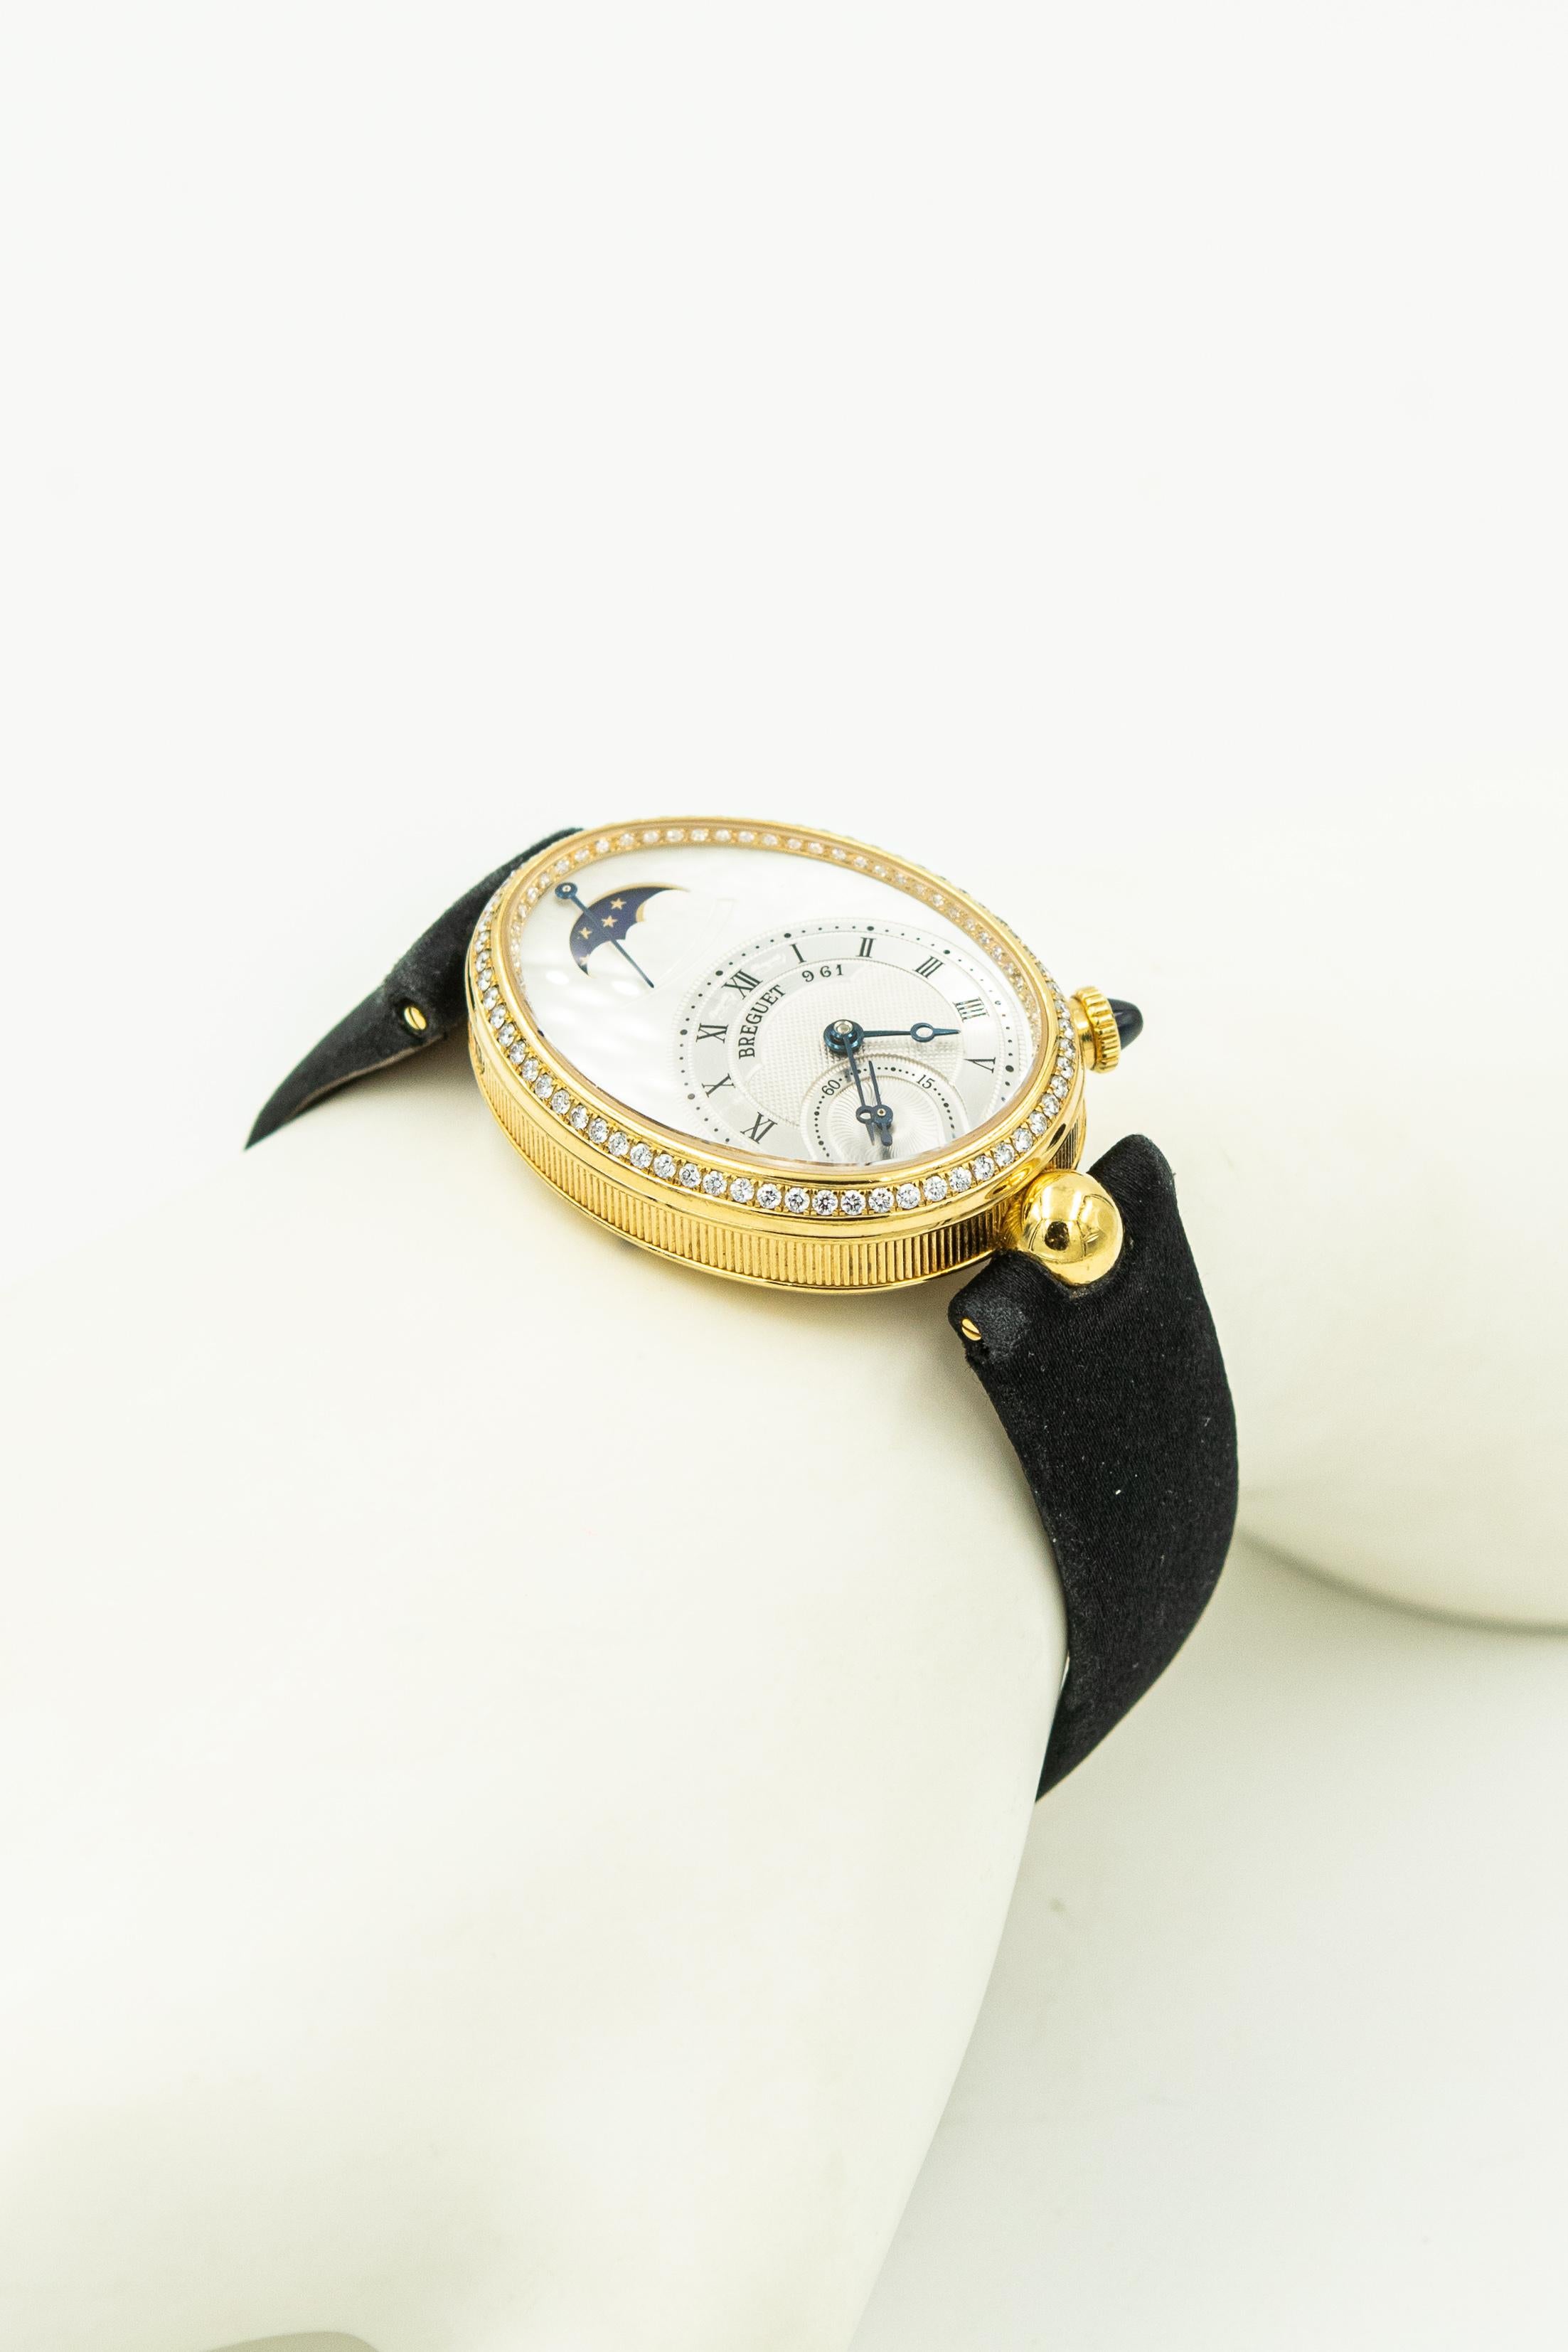 Breguet Reine de Naples 18k Yellow Gold with Diamond Bezel Ladies Moonphase Wrist Watch.  Reference 8908.  The bezel has 128 white round brilliant diamonds with a total weight estimate 0.83 carats.  The black satin strap has a deployant clasp and